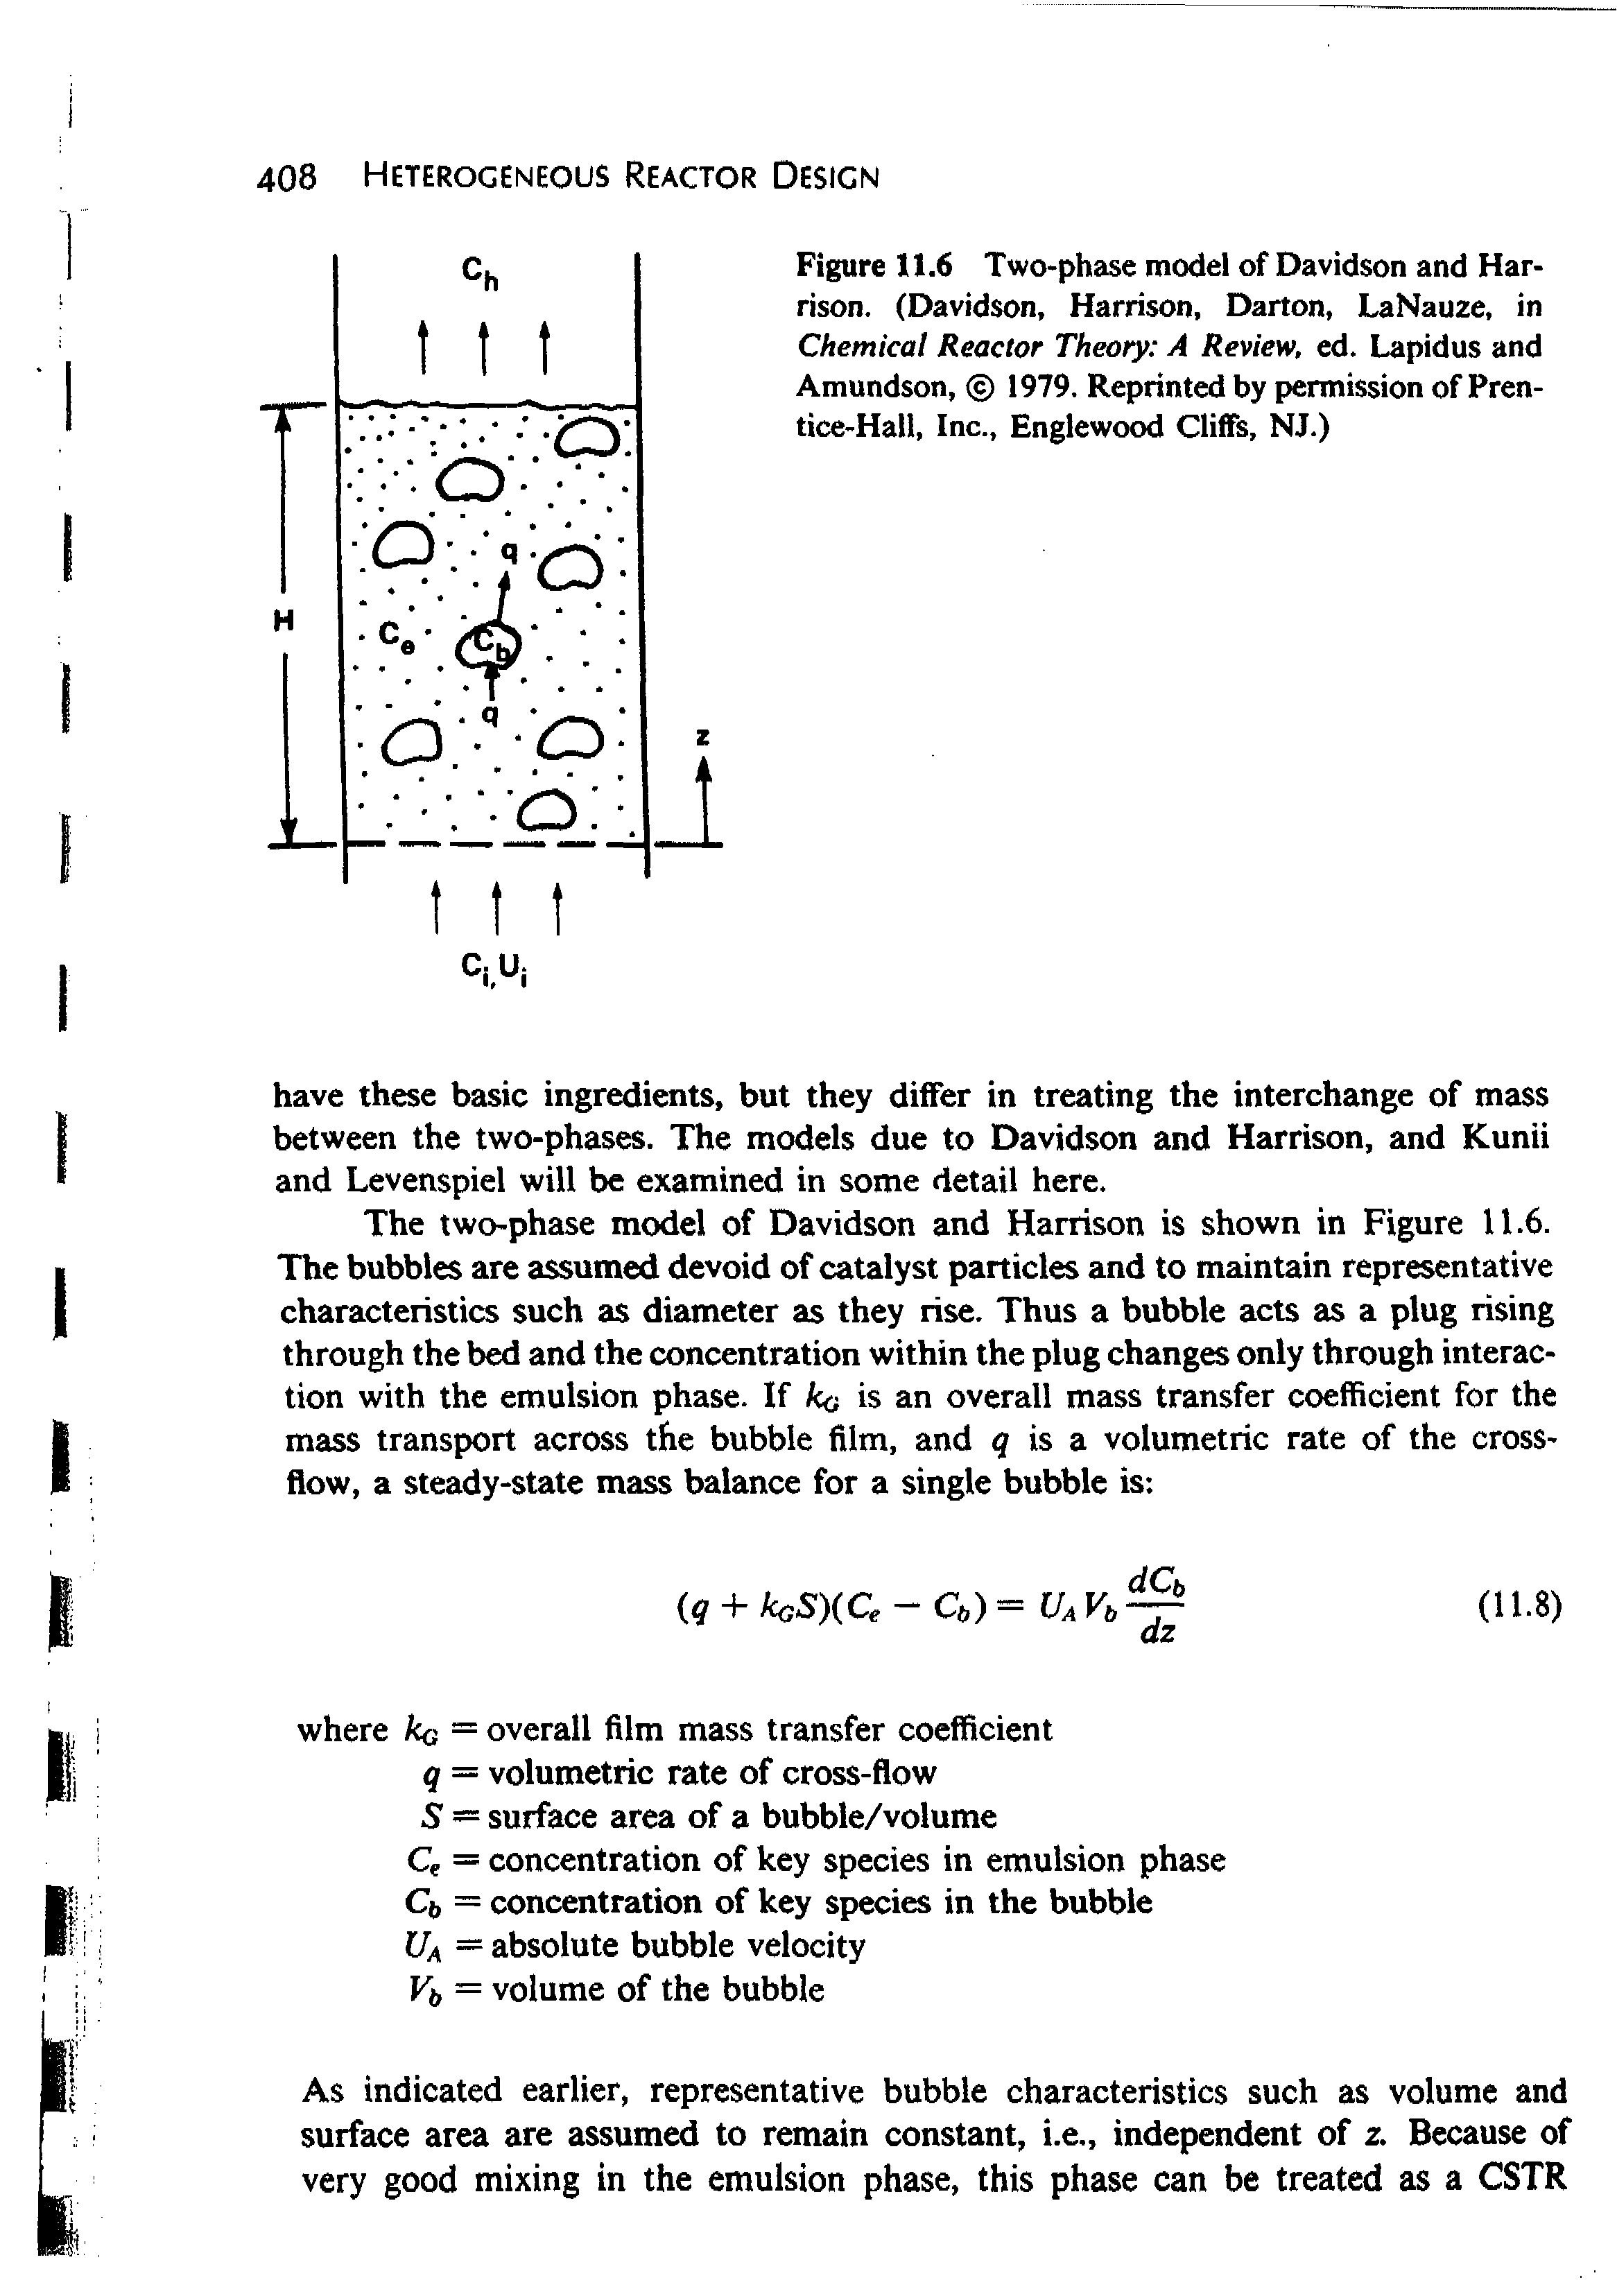 Figure 11.6 Two>phase model of Davidson and Harrison. (Davidson, Harrison, Darton, LaNauze, in Chemical Reactor Theory A Review, ed. Lapidus and Amundson, 1979. Reprinted by permission of Prentice-Hall, Inc., Englewood Cliffs, NJ.)...